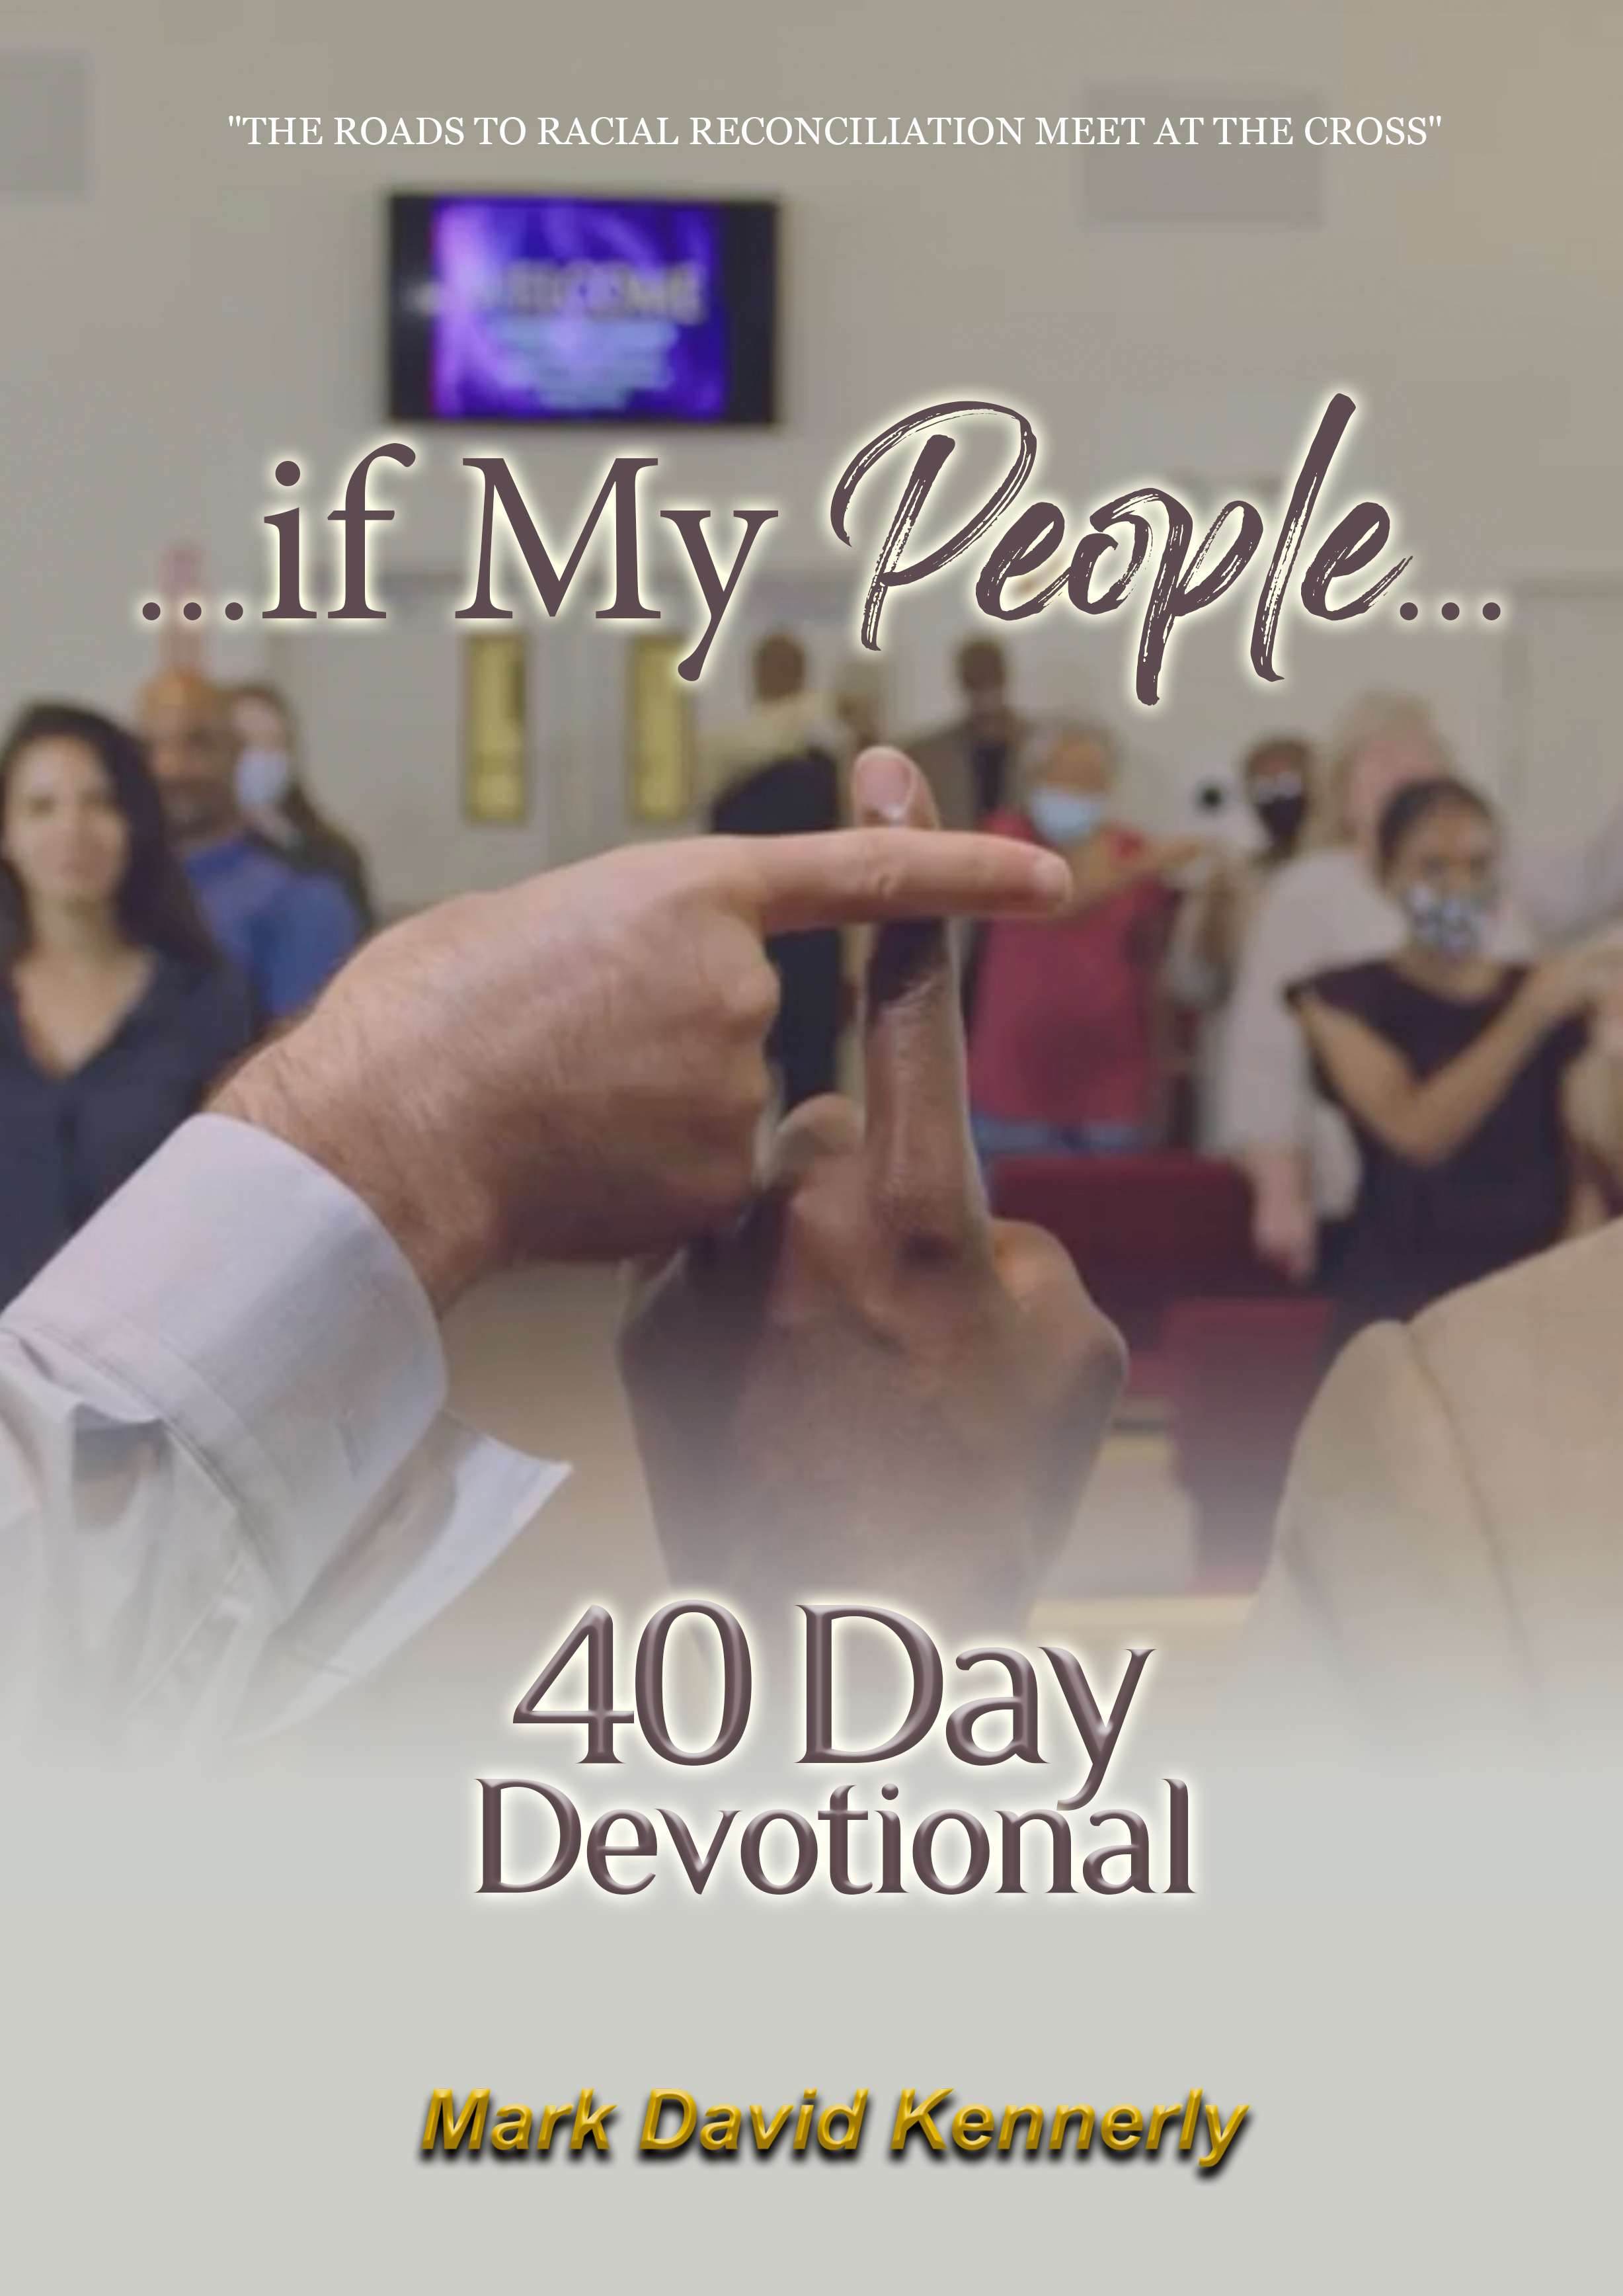 …if My People… 40 Day Devotional (eBook) Download